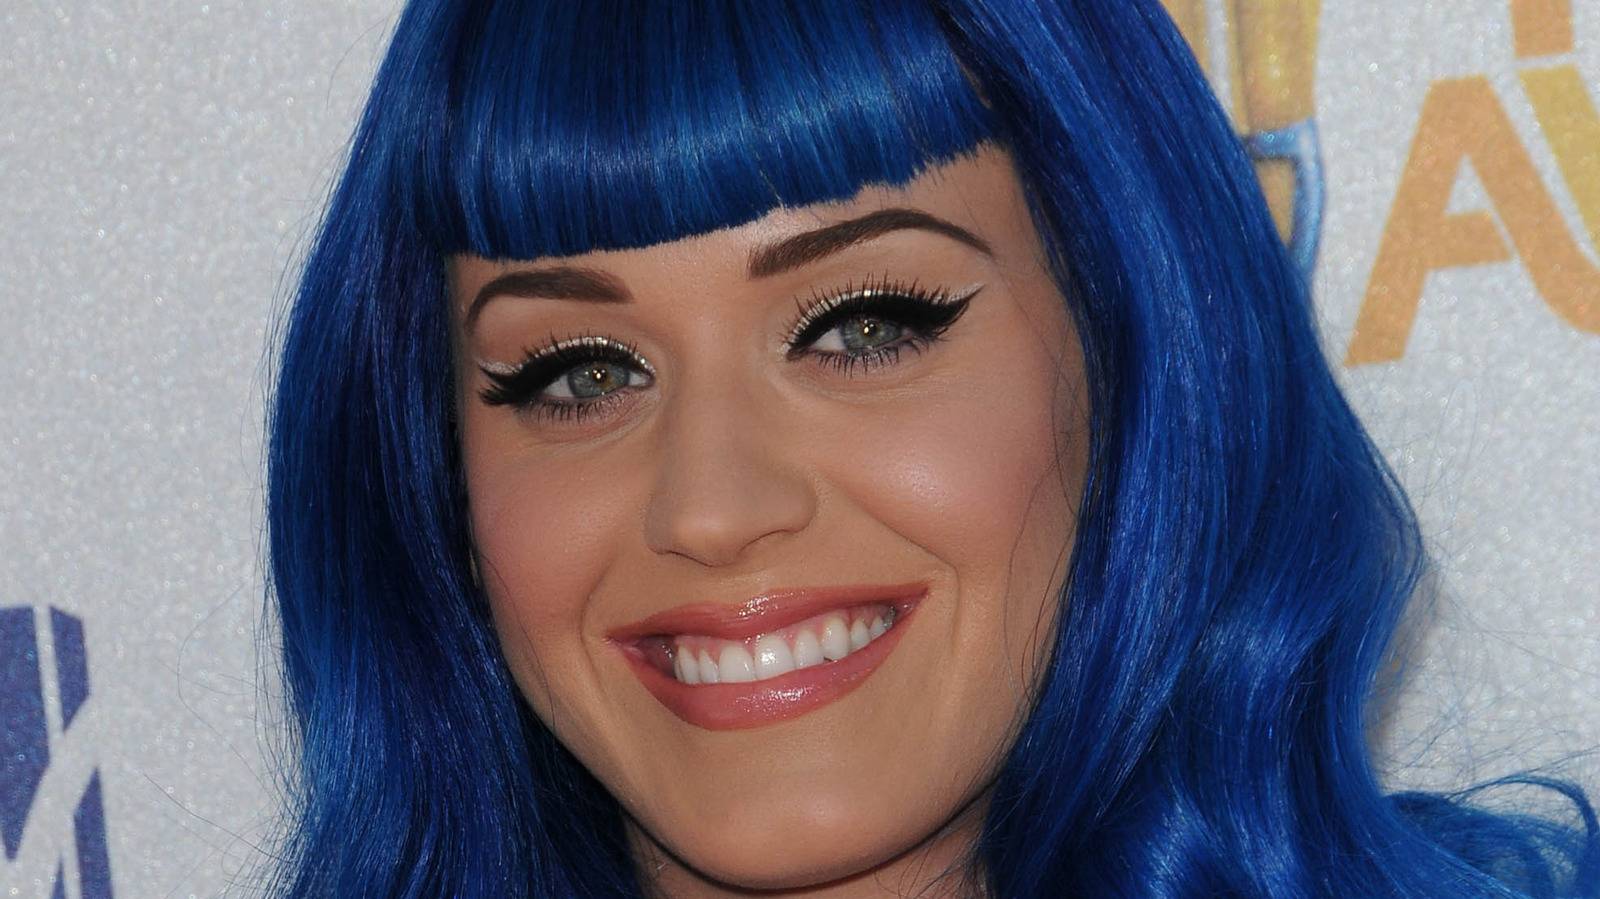 1. "Katy Perry's Blue Hair Transformation: See Her Bold New Look!" - wide 3